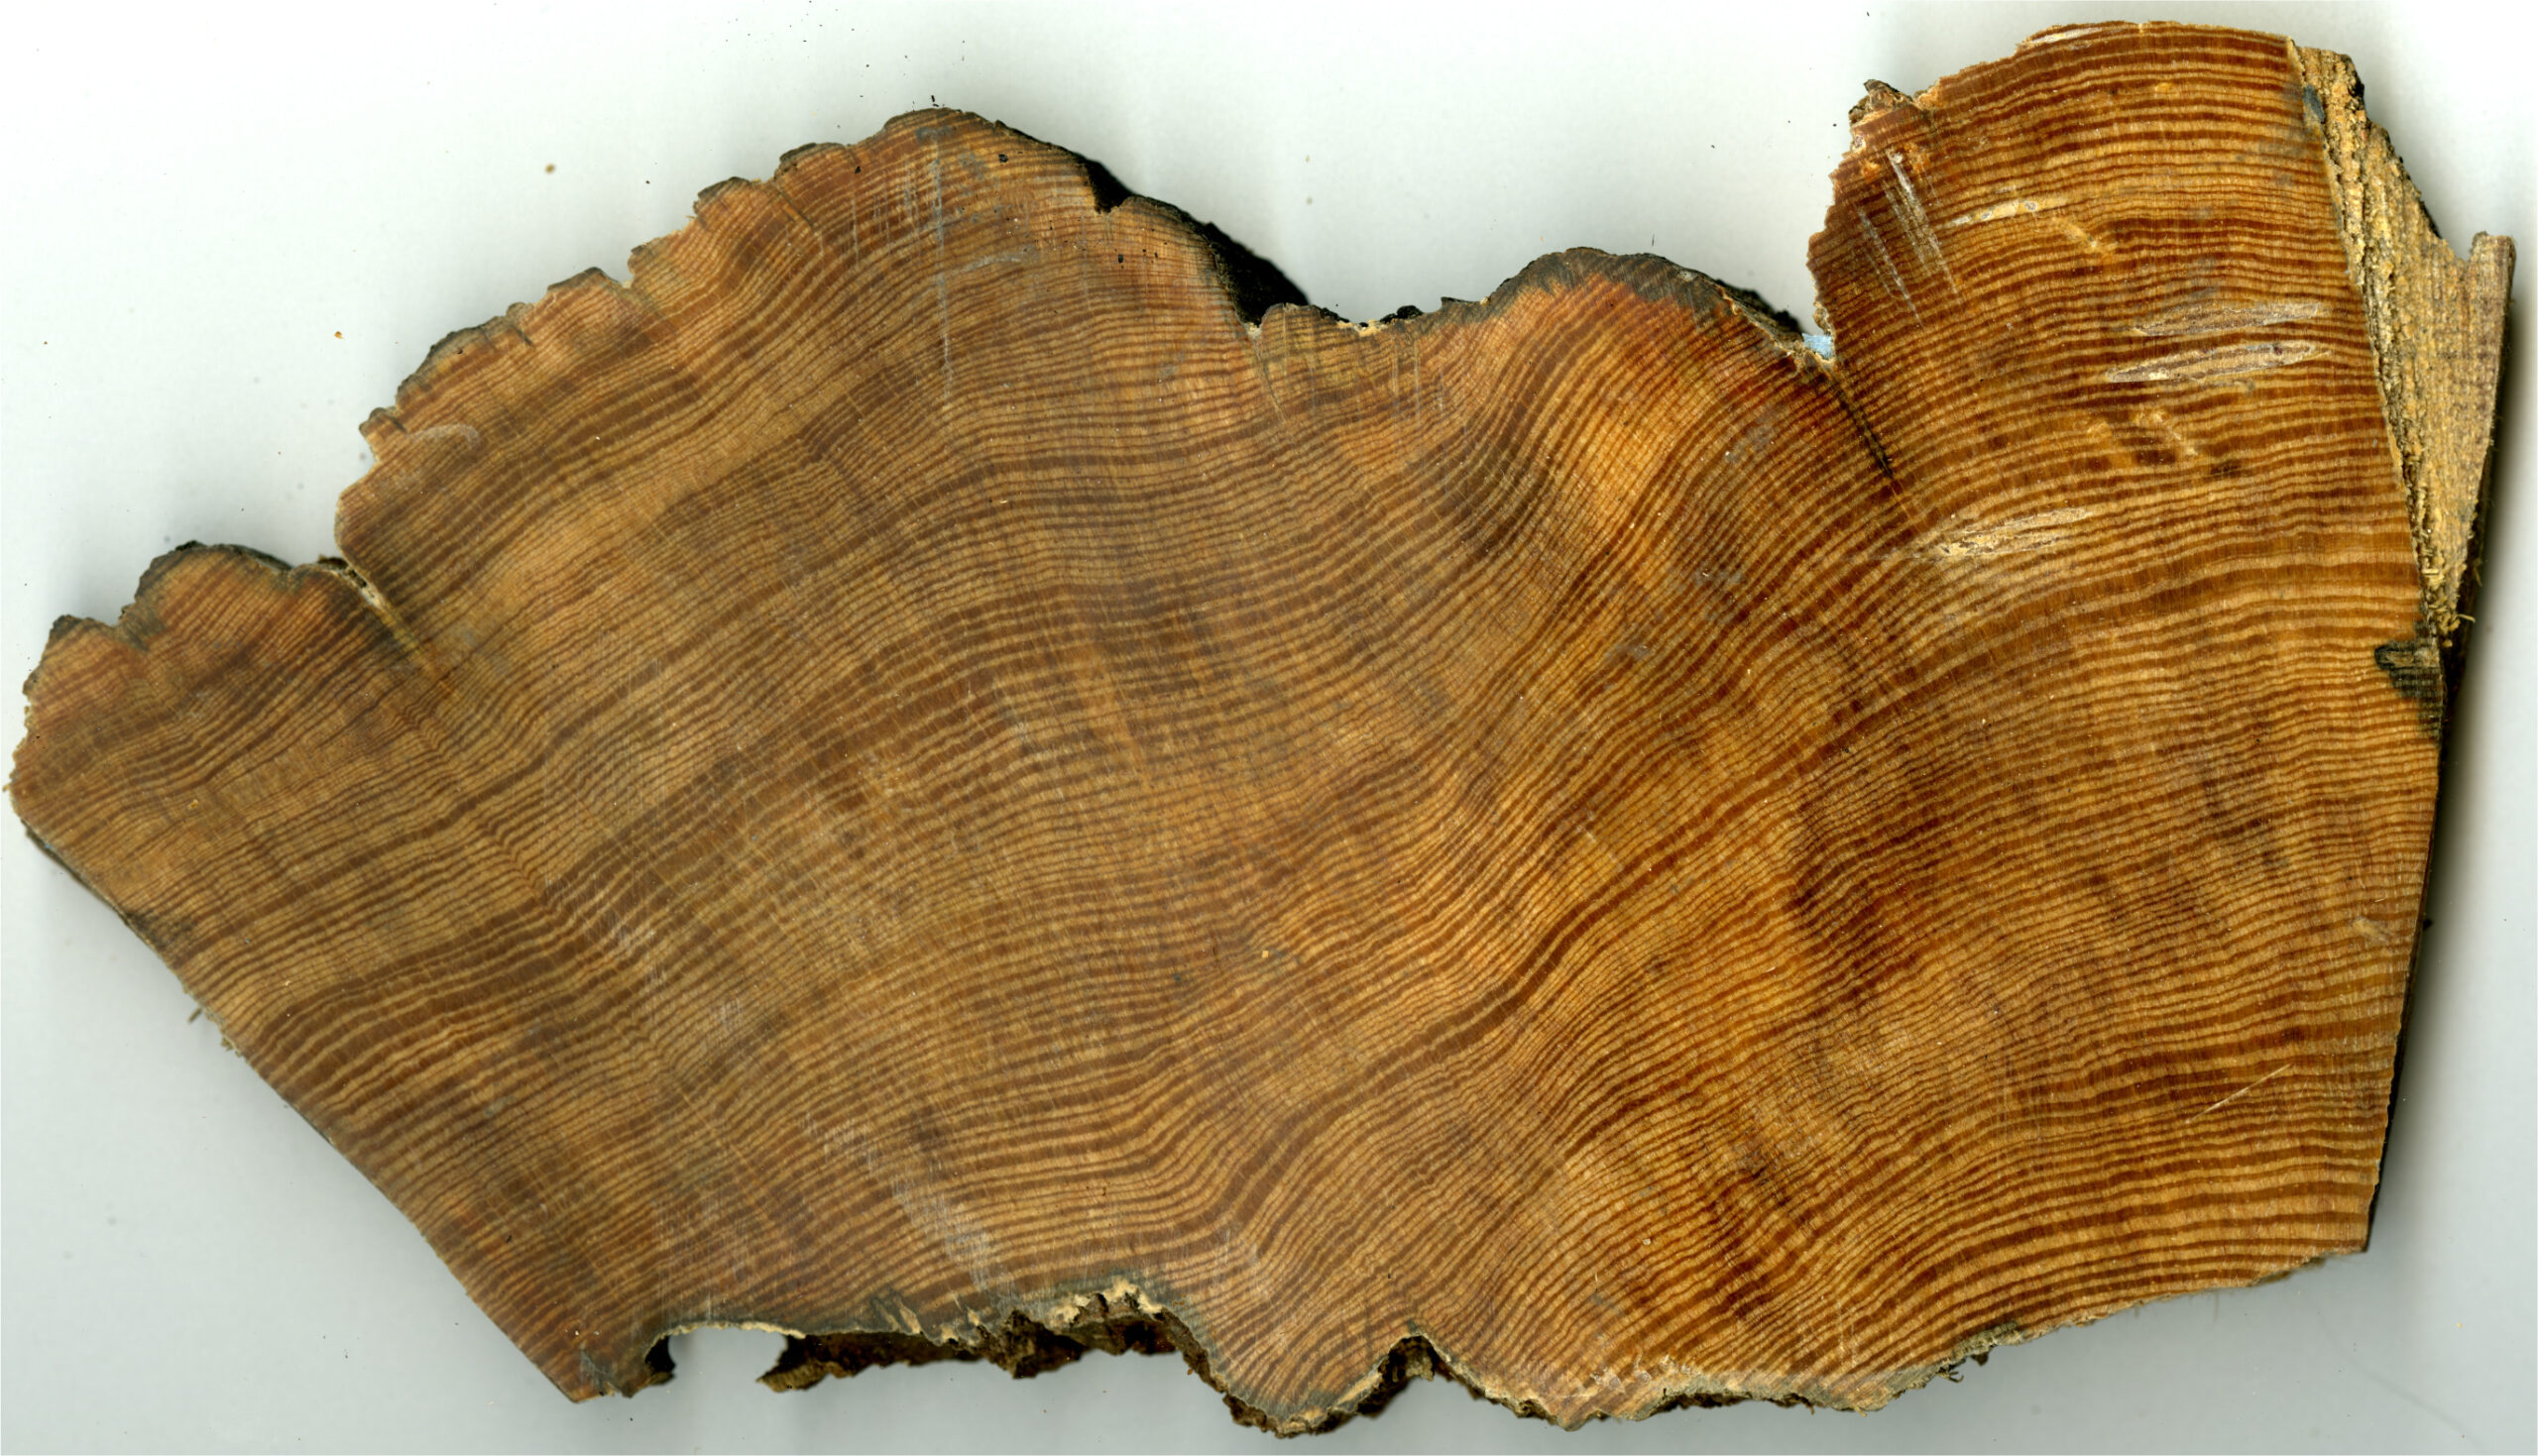 300 years of tree rings show just how badly hurricanes have soaked the Carolinas